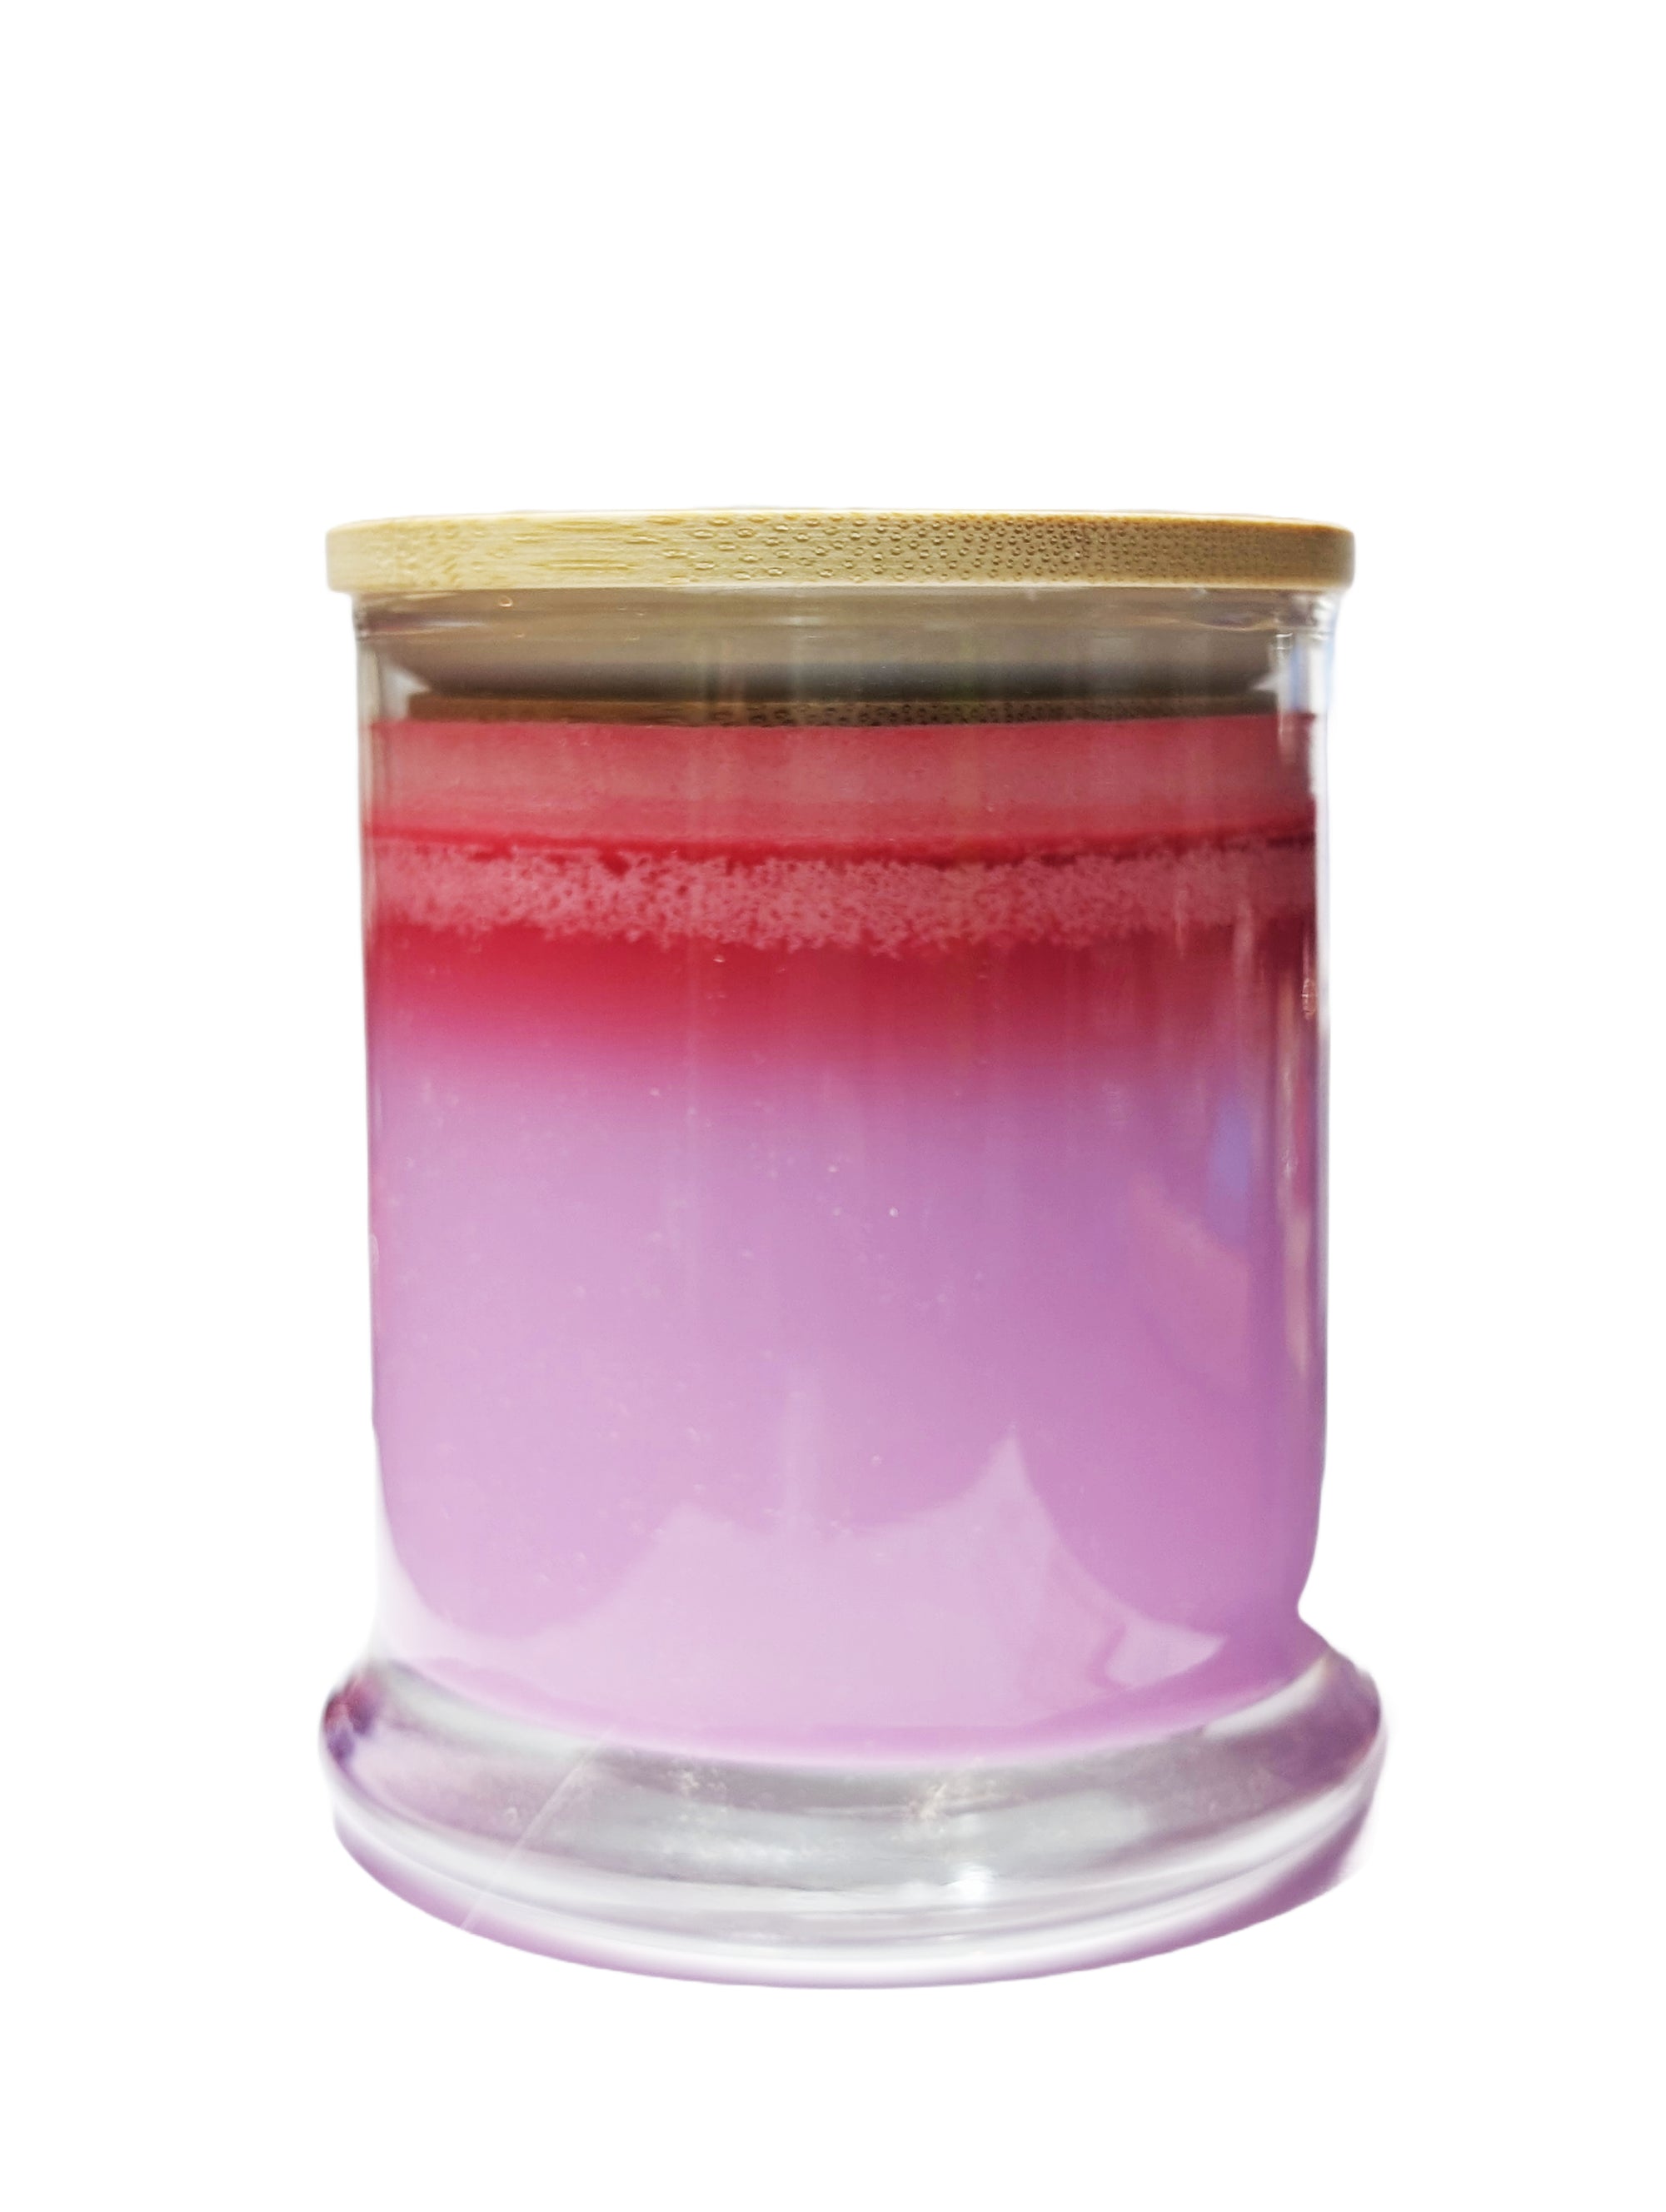 Island Plumeria Pure Soy Candle 12 oz with Bamboo Lid | Tropical Home Fragrance